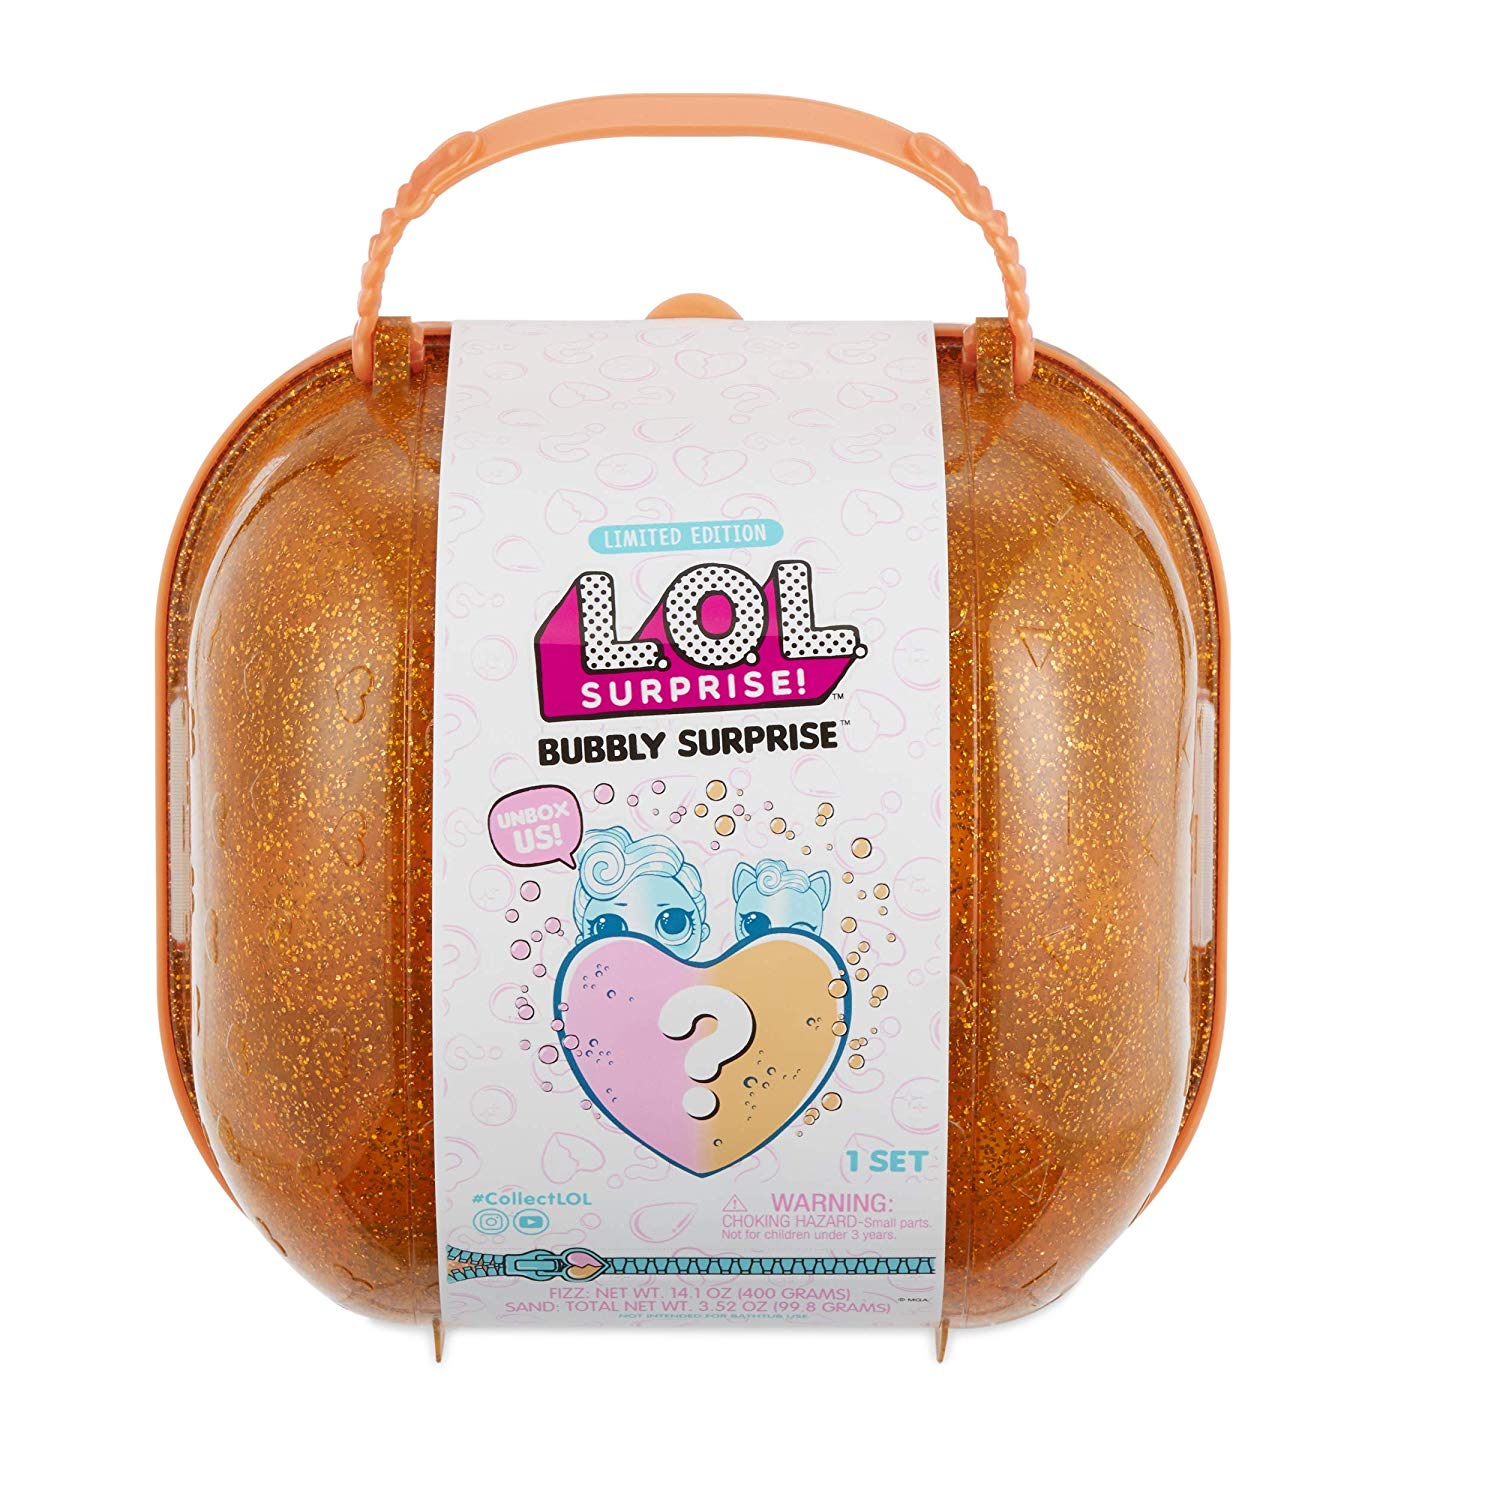 LOL Surprise Bubbly Surprise (Orange) With Exclusive Doll and Pet, Great Gift for Kids Ages 4 5 6+ - image 1 of 7